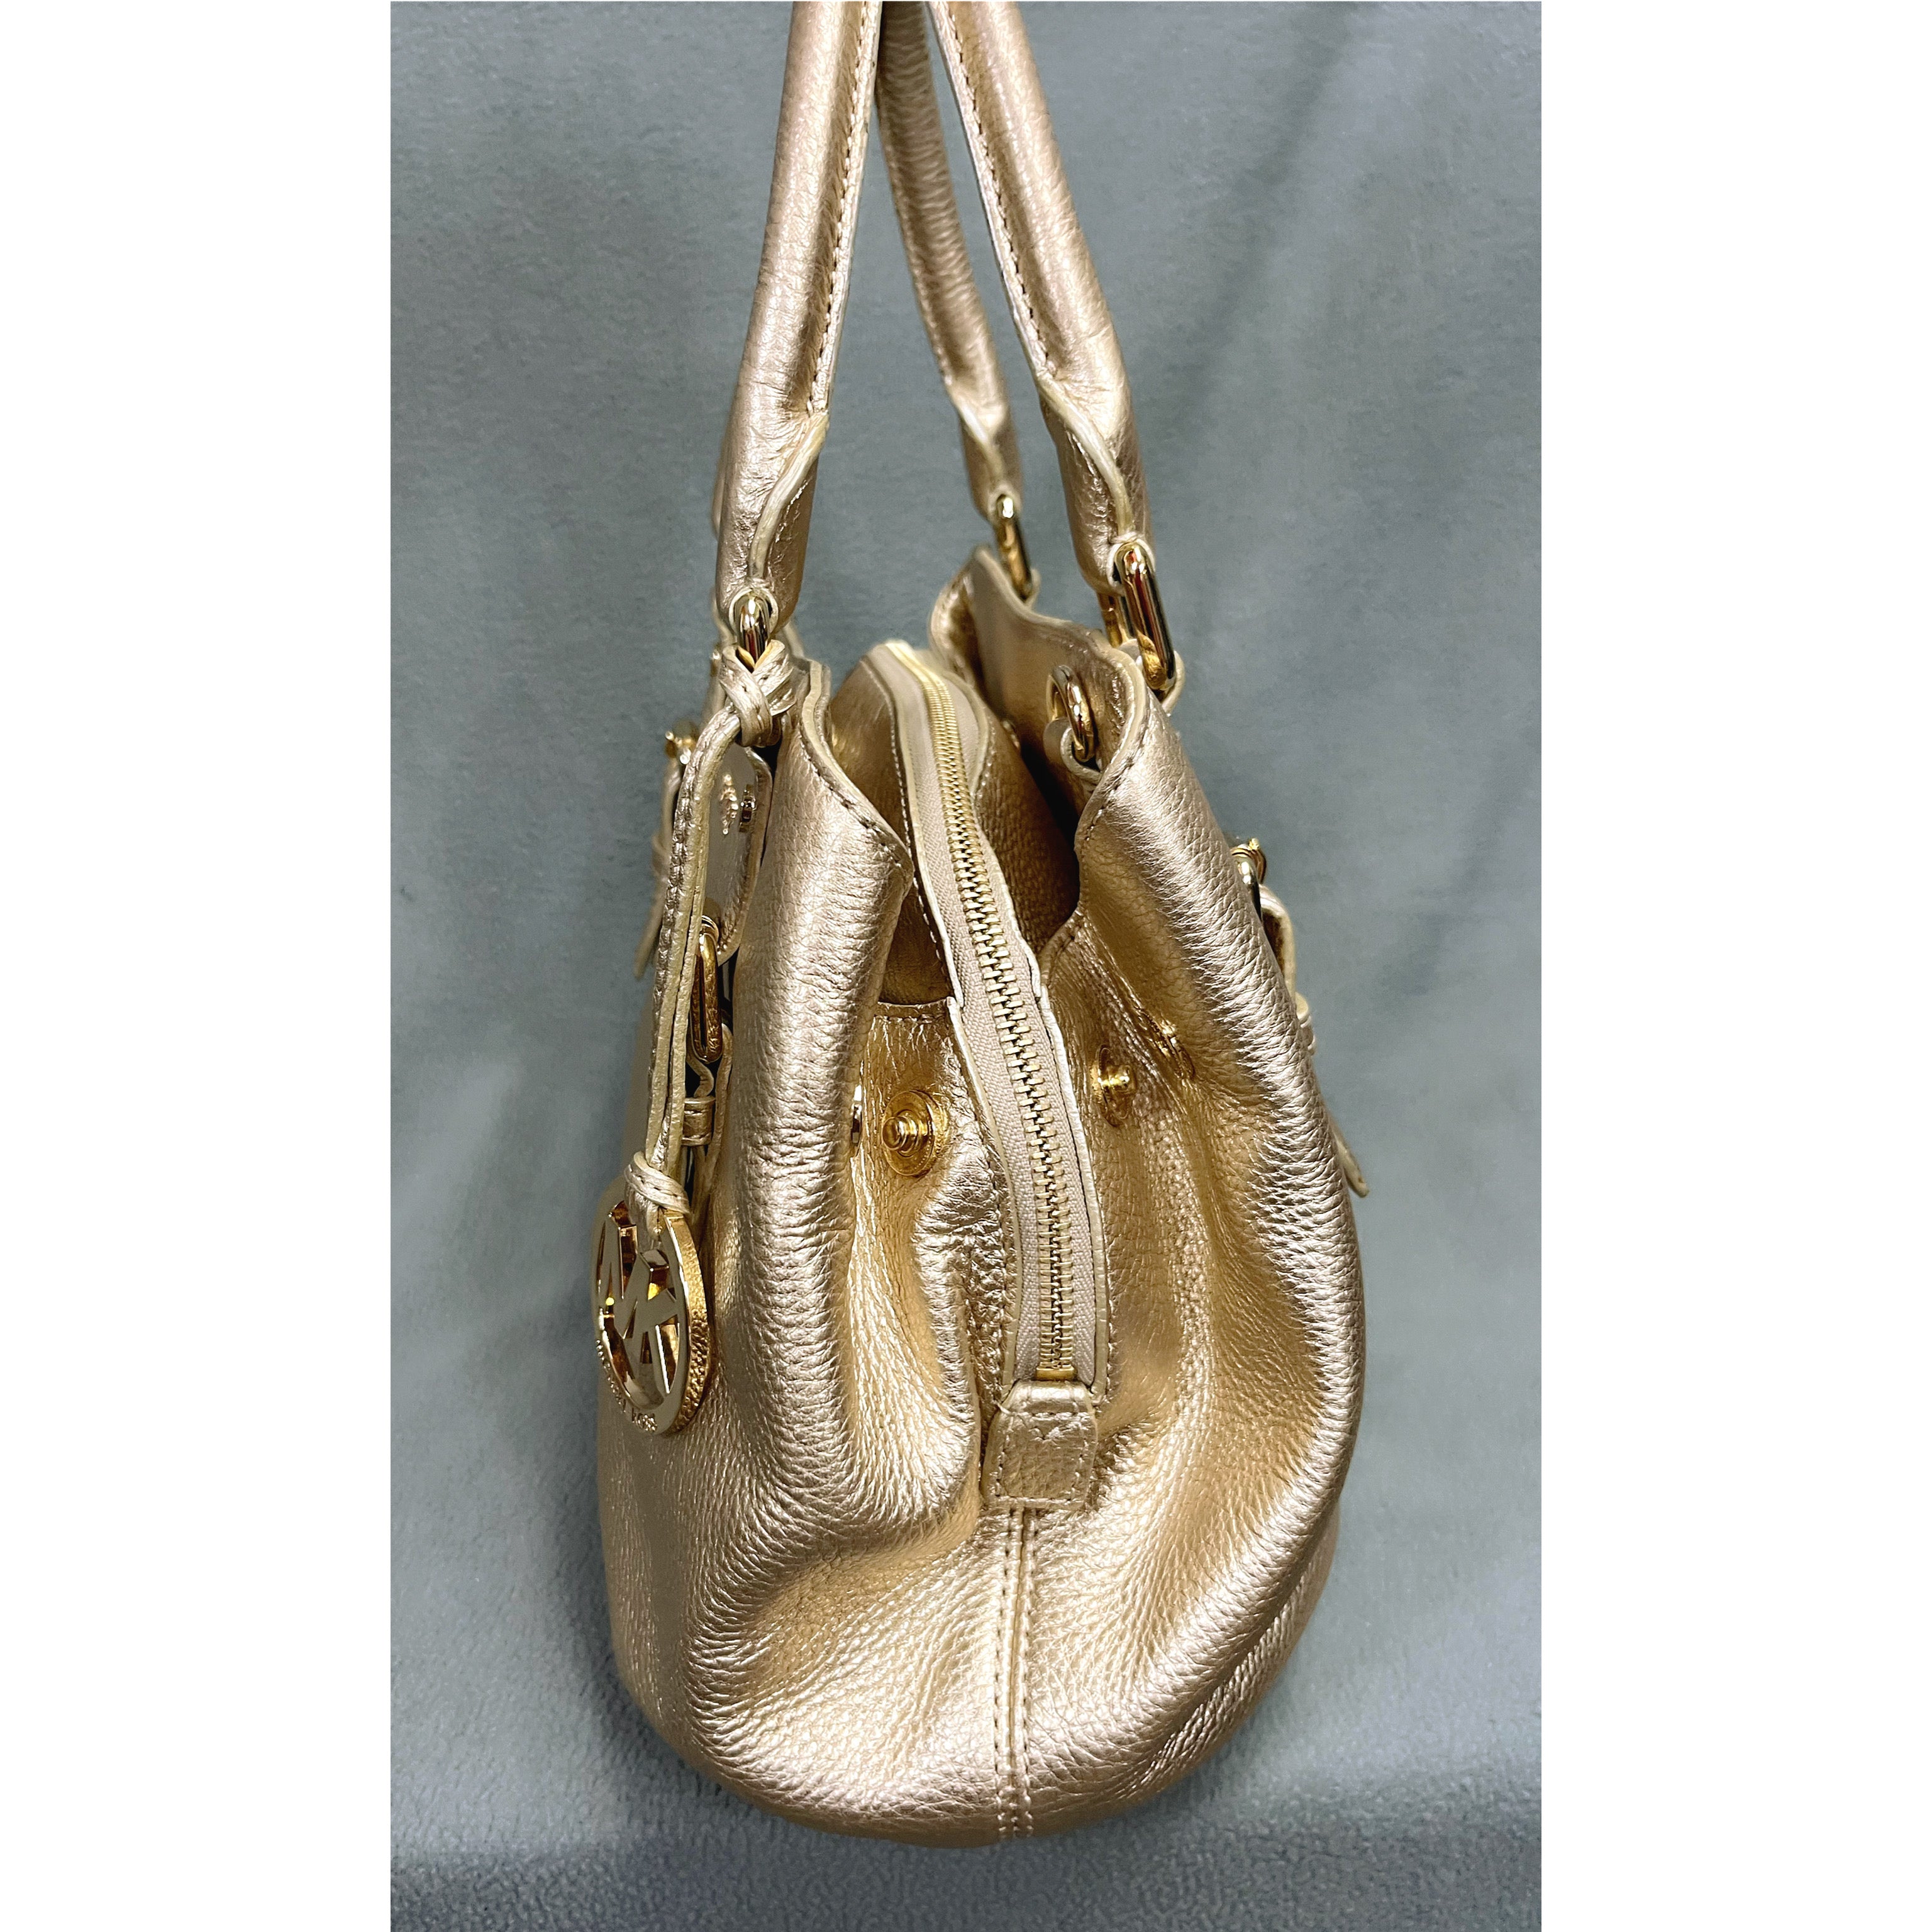 Michael Kors gold leather bag, NEW without tags